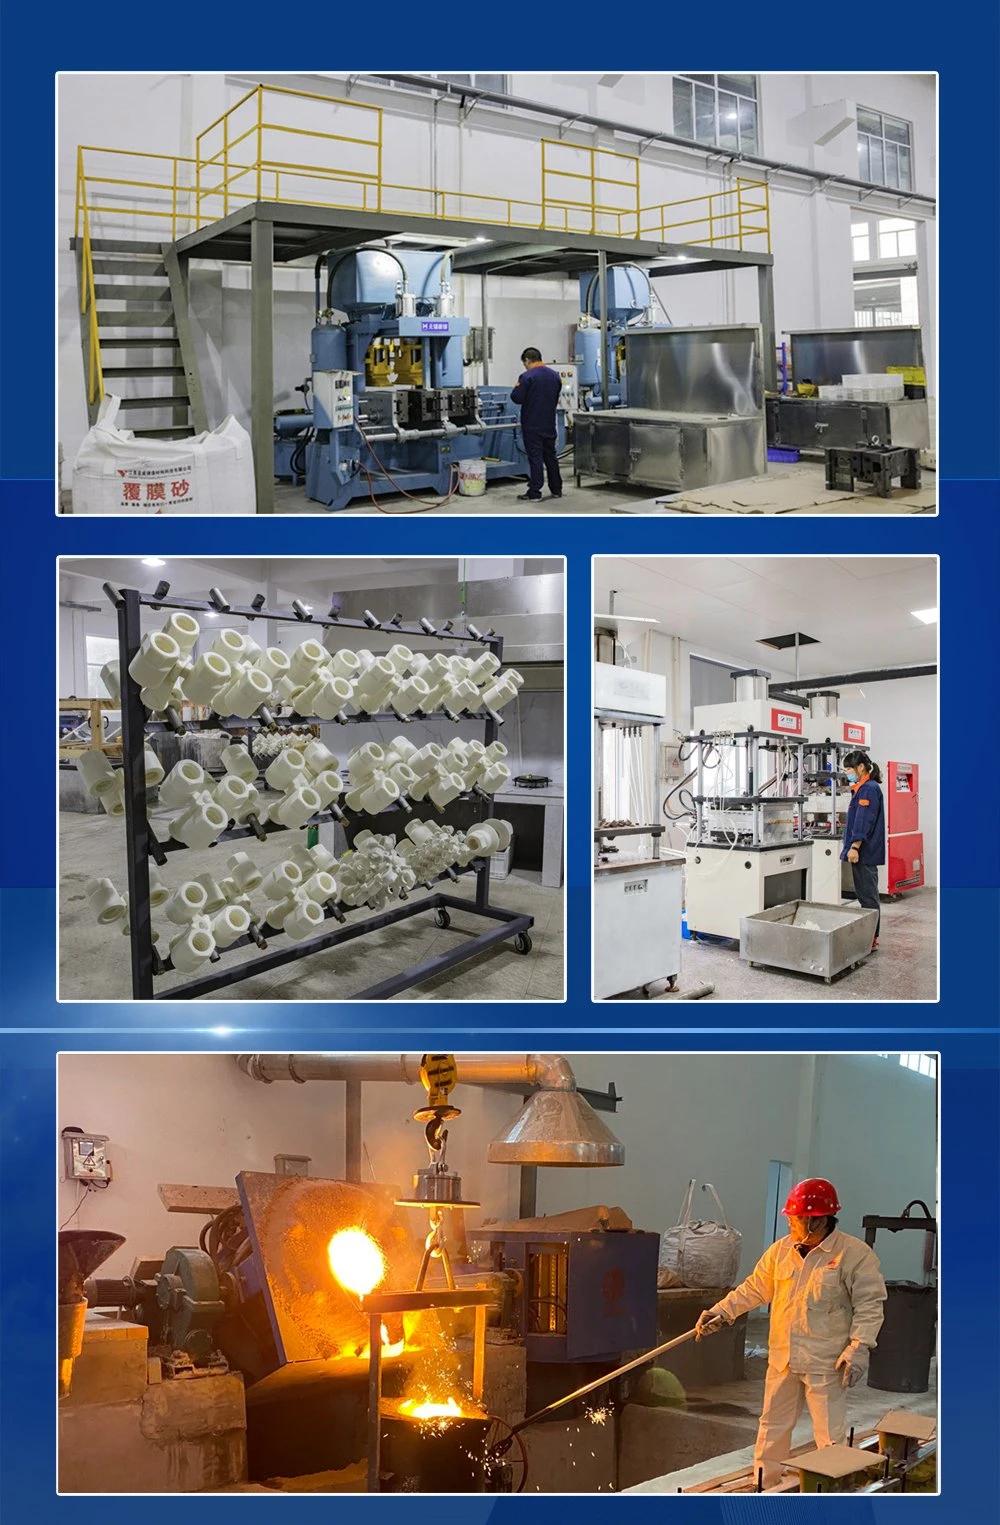 Casting,Froging,Pressing,Accessories,Component,Mating Facility,Bus,Auto Part,Nuts,Construction,Underground,Hot Galvanzied,Power Fitting,Train,Subway,Car,Nuts